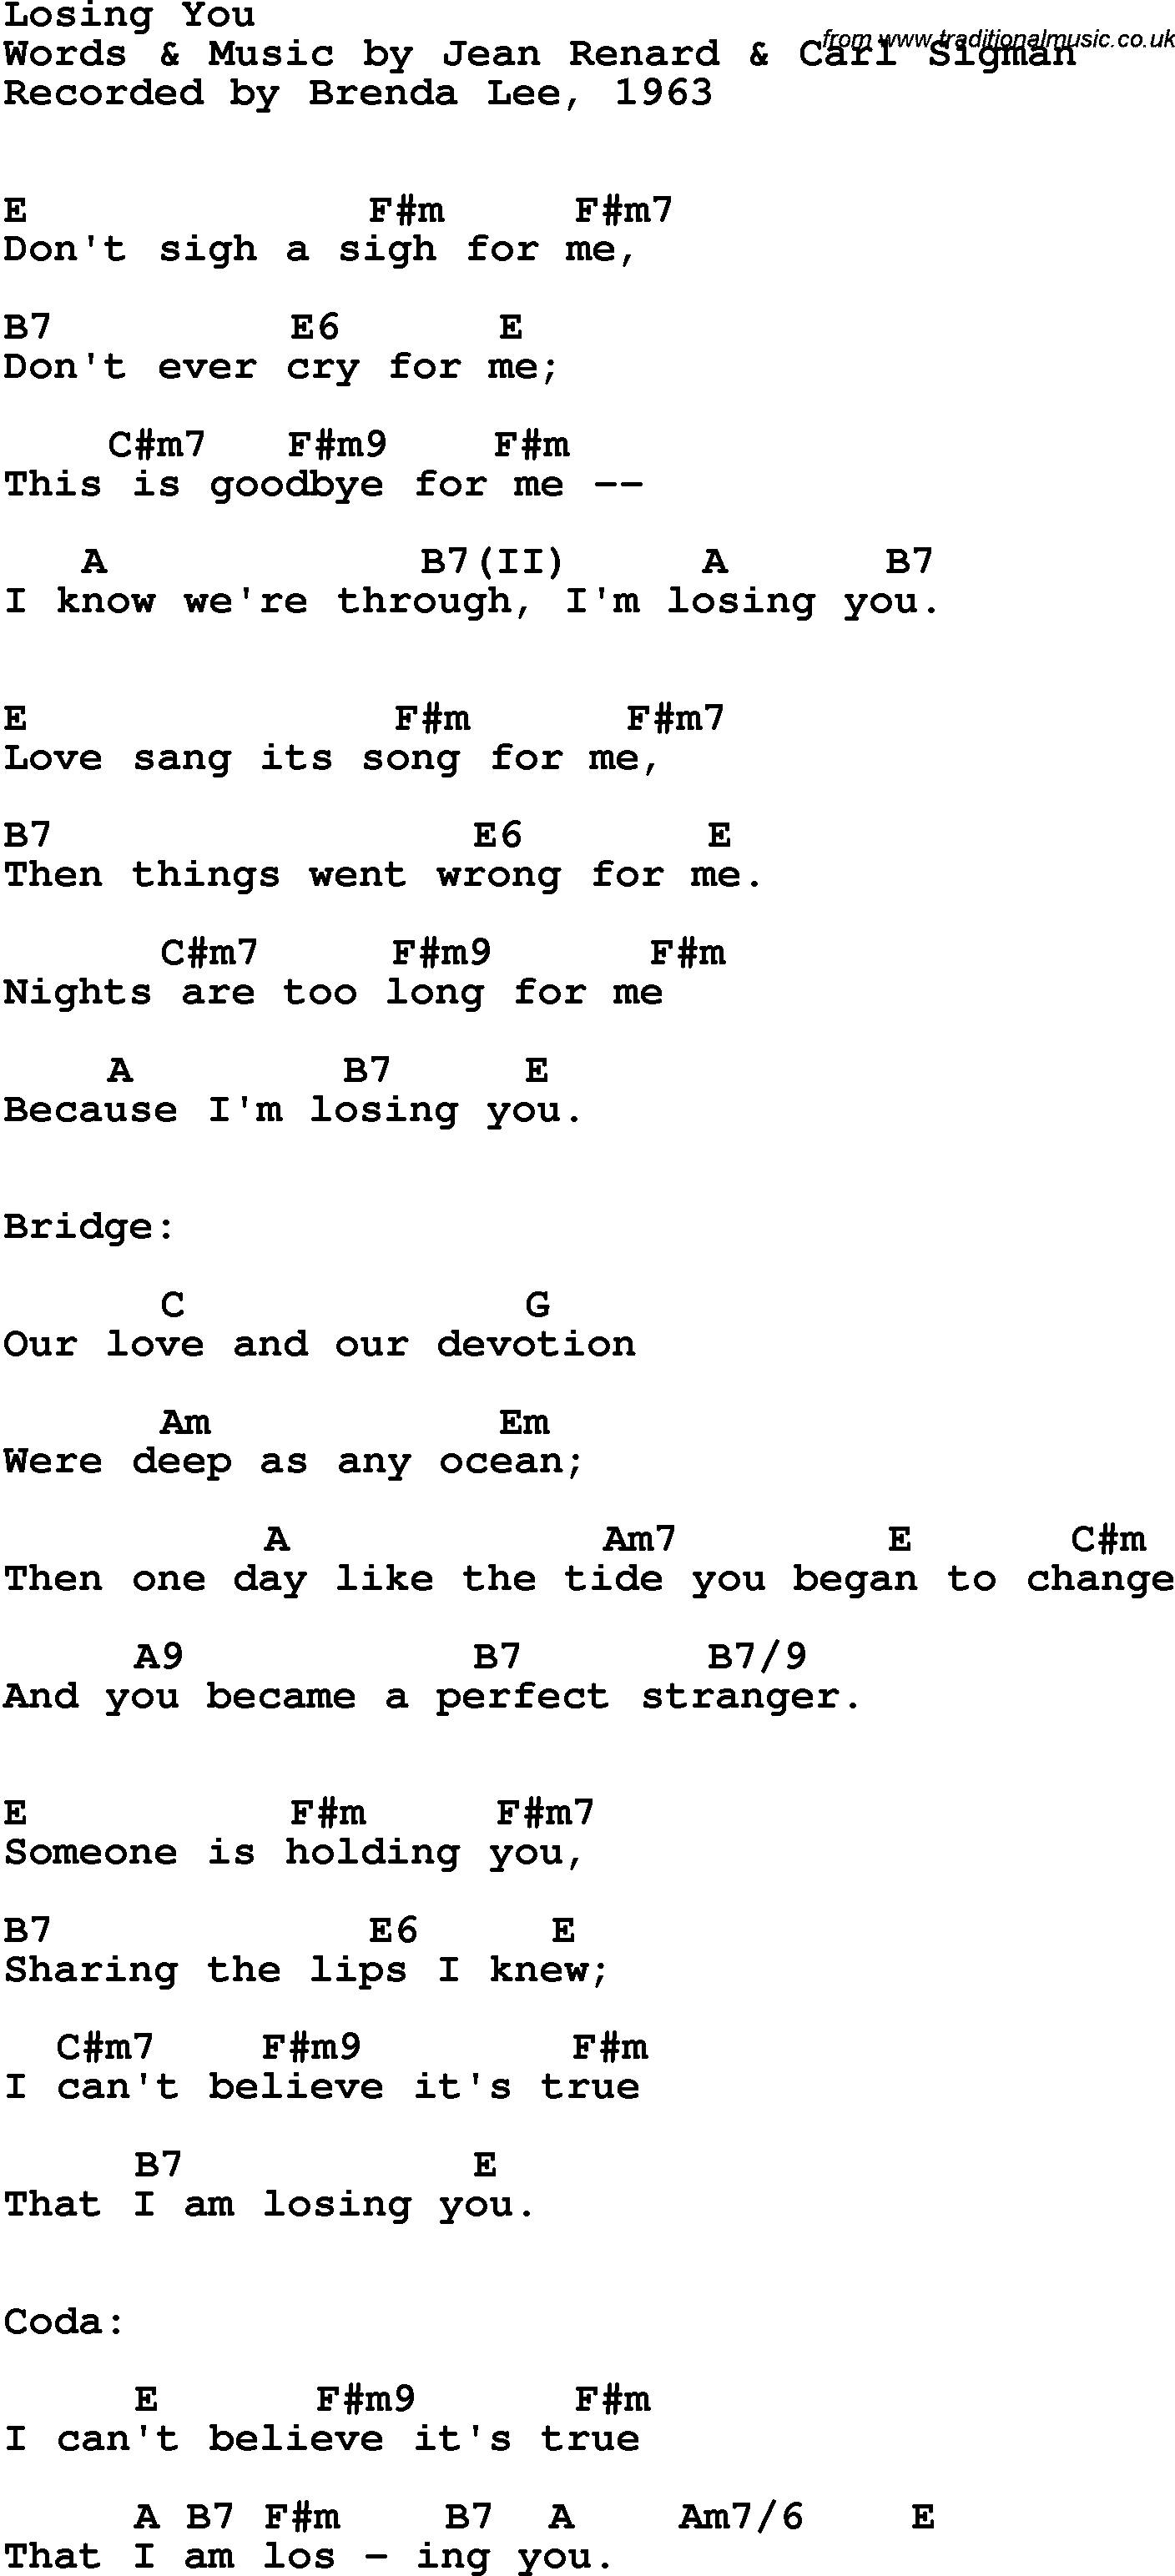 Song Lyrics with guitar chords for Losing You - Brenda Lee, 1963